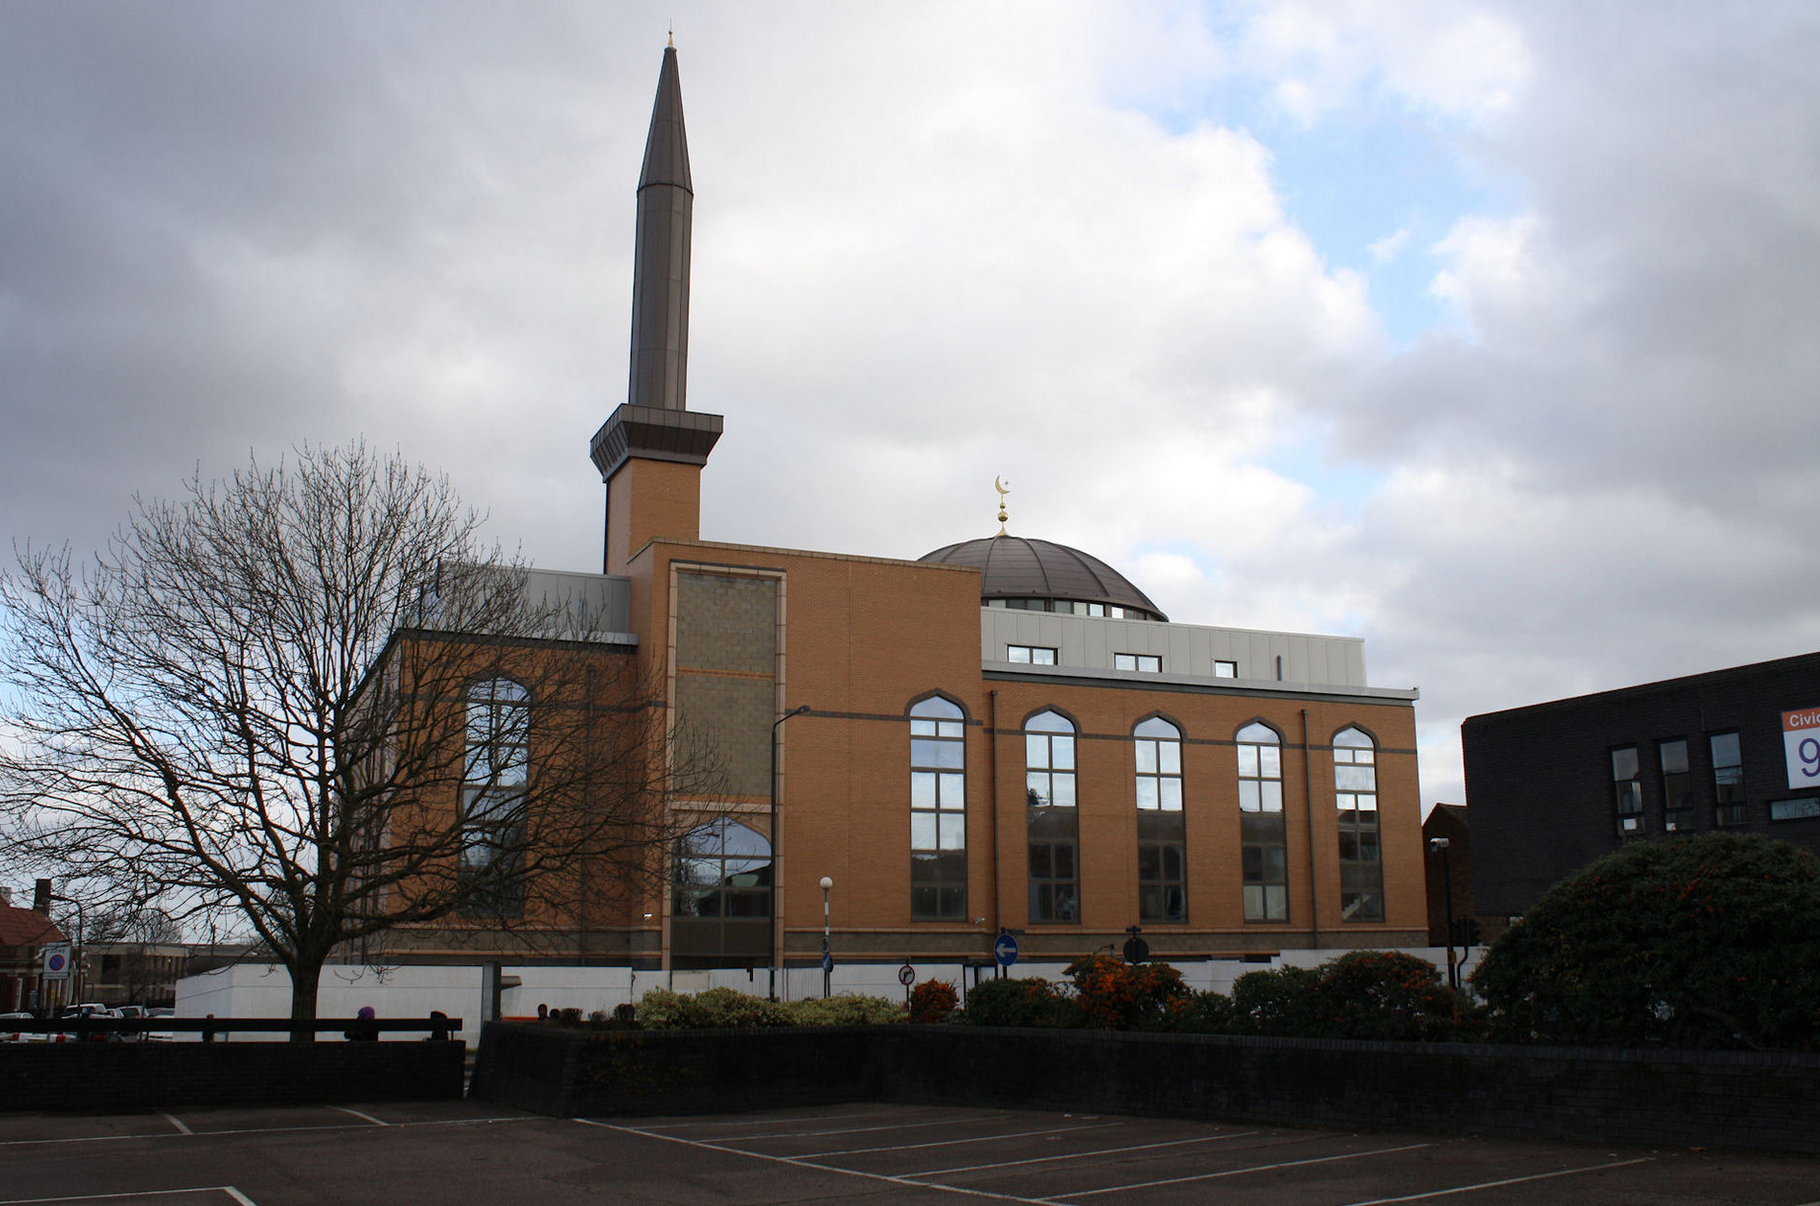 Harrow Central Mosque, UK. Author: Robert Cutts from Bristol, England, UK. attribution: This file is licensed under the Creative Commons Attribution 2.0 Generic license.